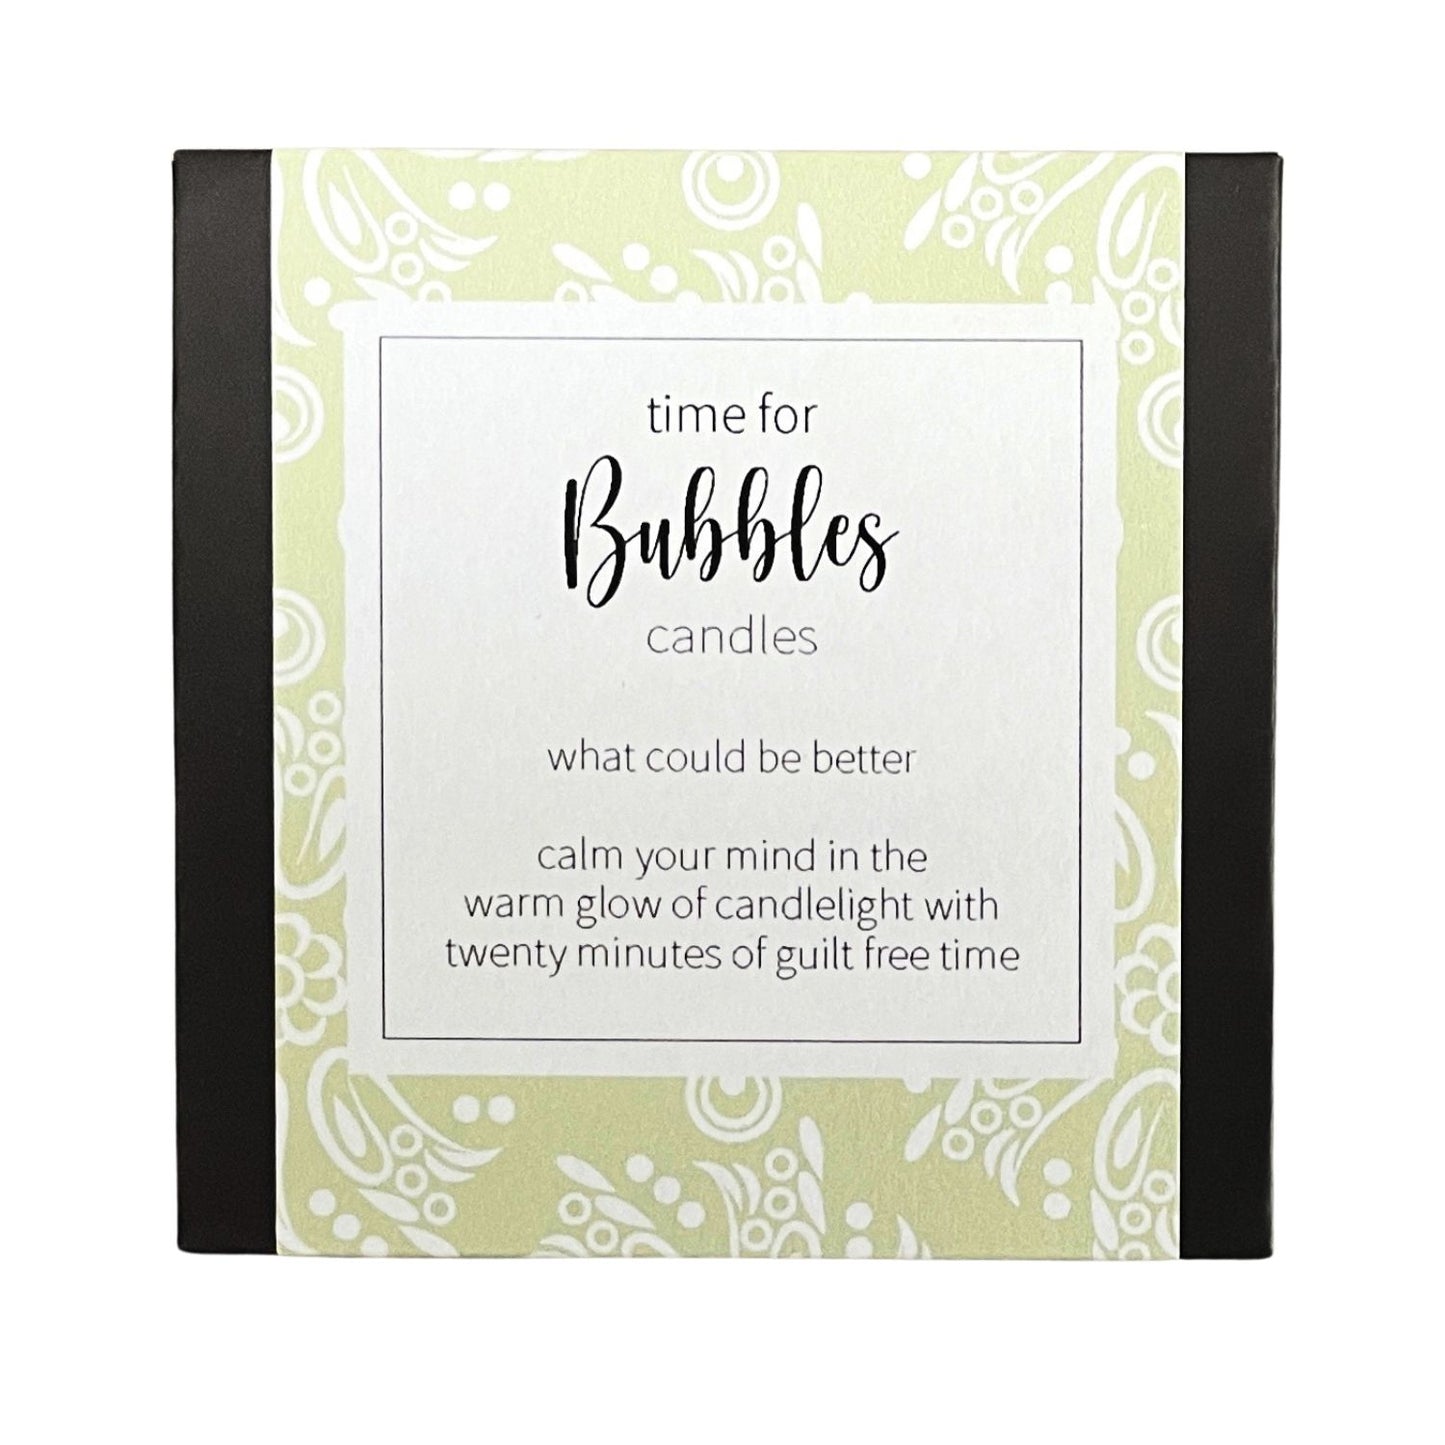 Cotton & Grey Time For Bubbles Candles Bath Bliss Candle Gift Idea